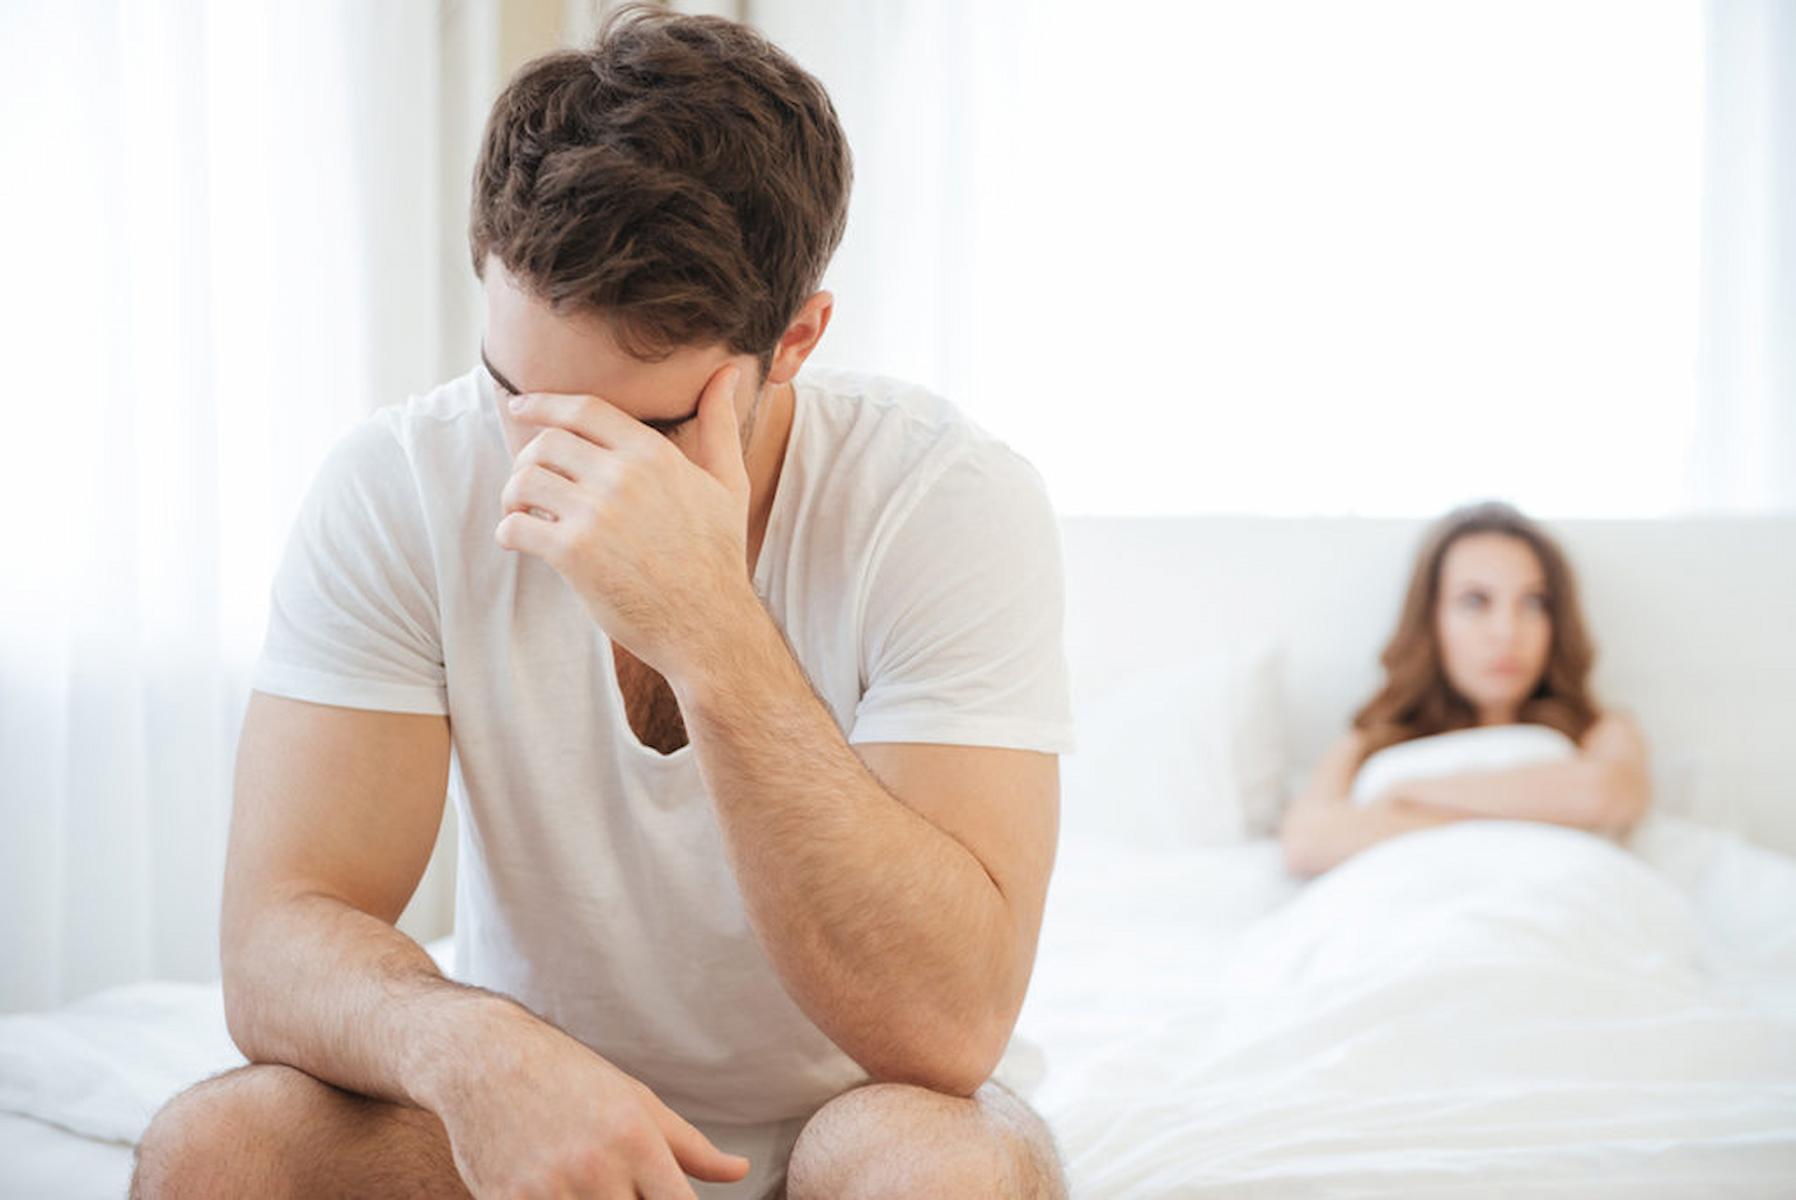 Erectile Dysfunction: Know The Natural Ways To Overcome Erectile Dysfunction